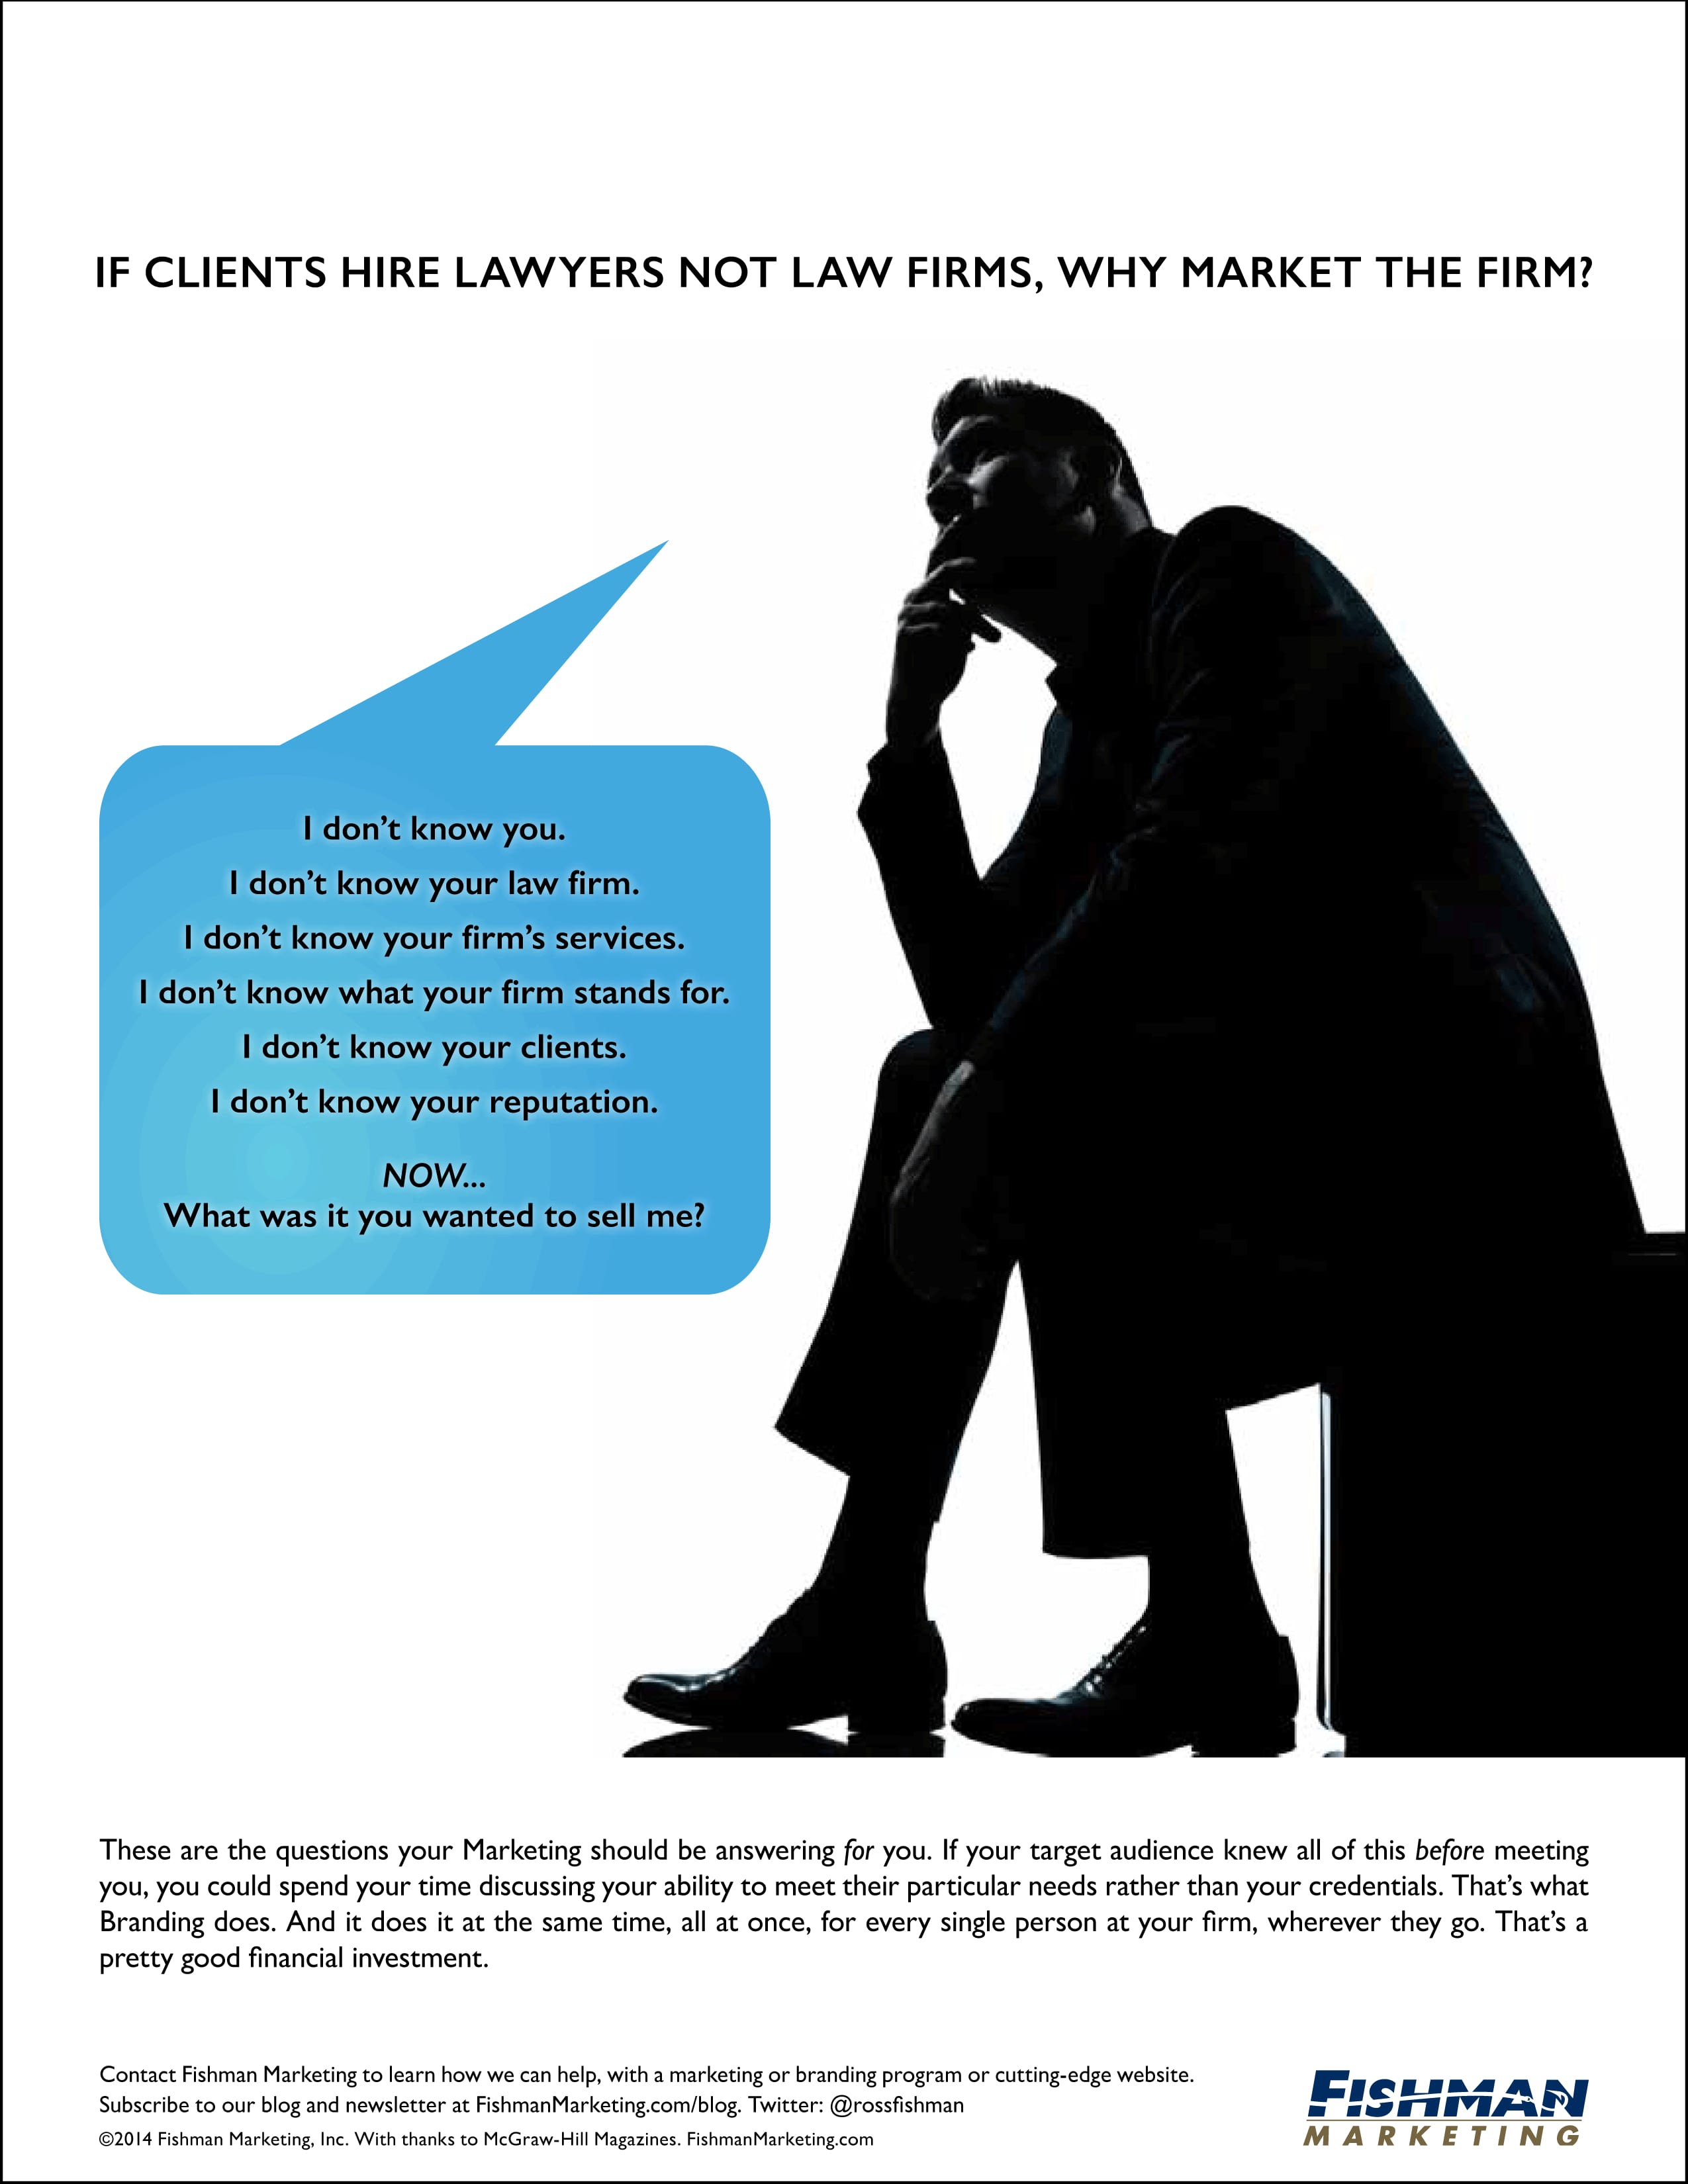 Q:  If clients hire lawyers, why market The Firm?